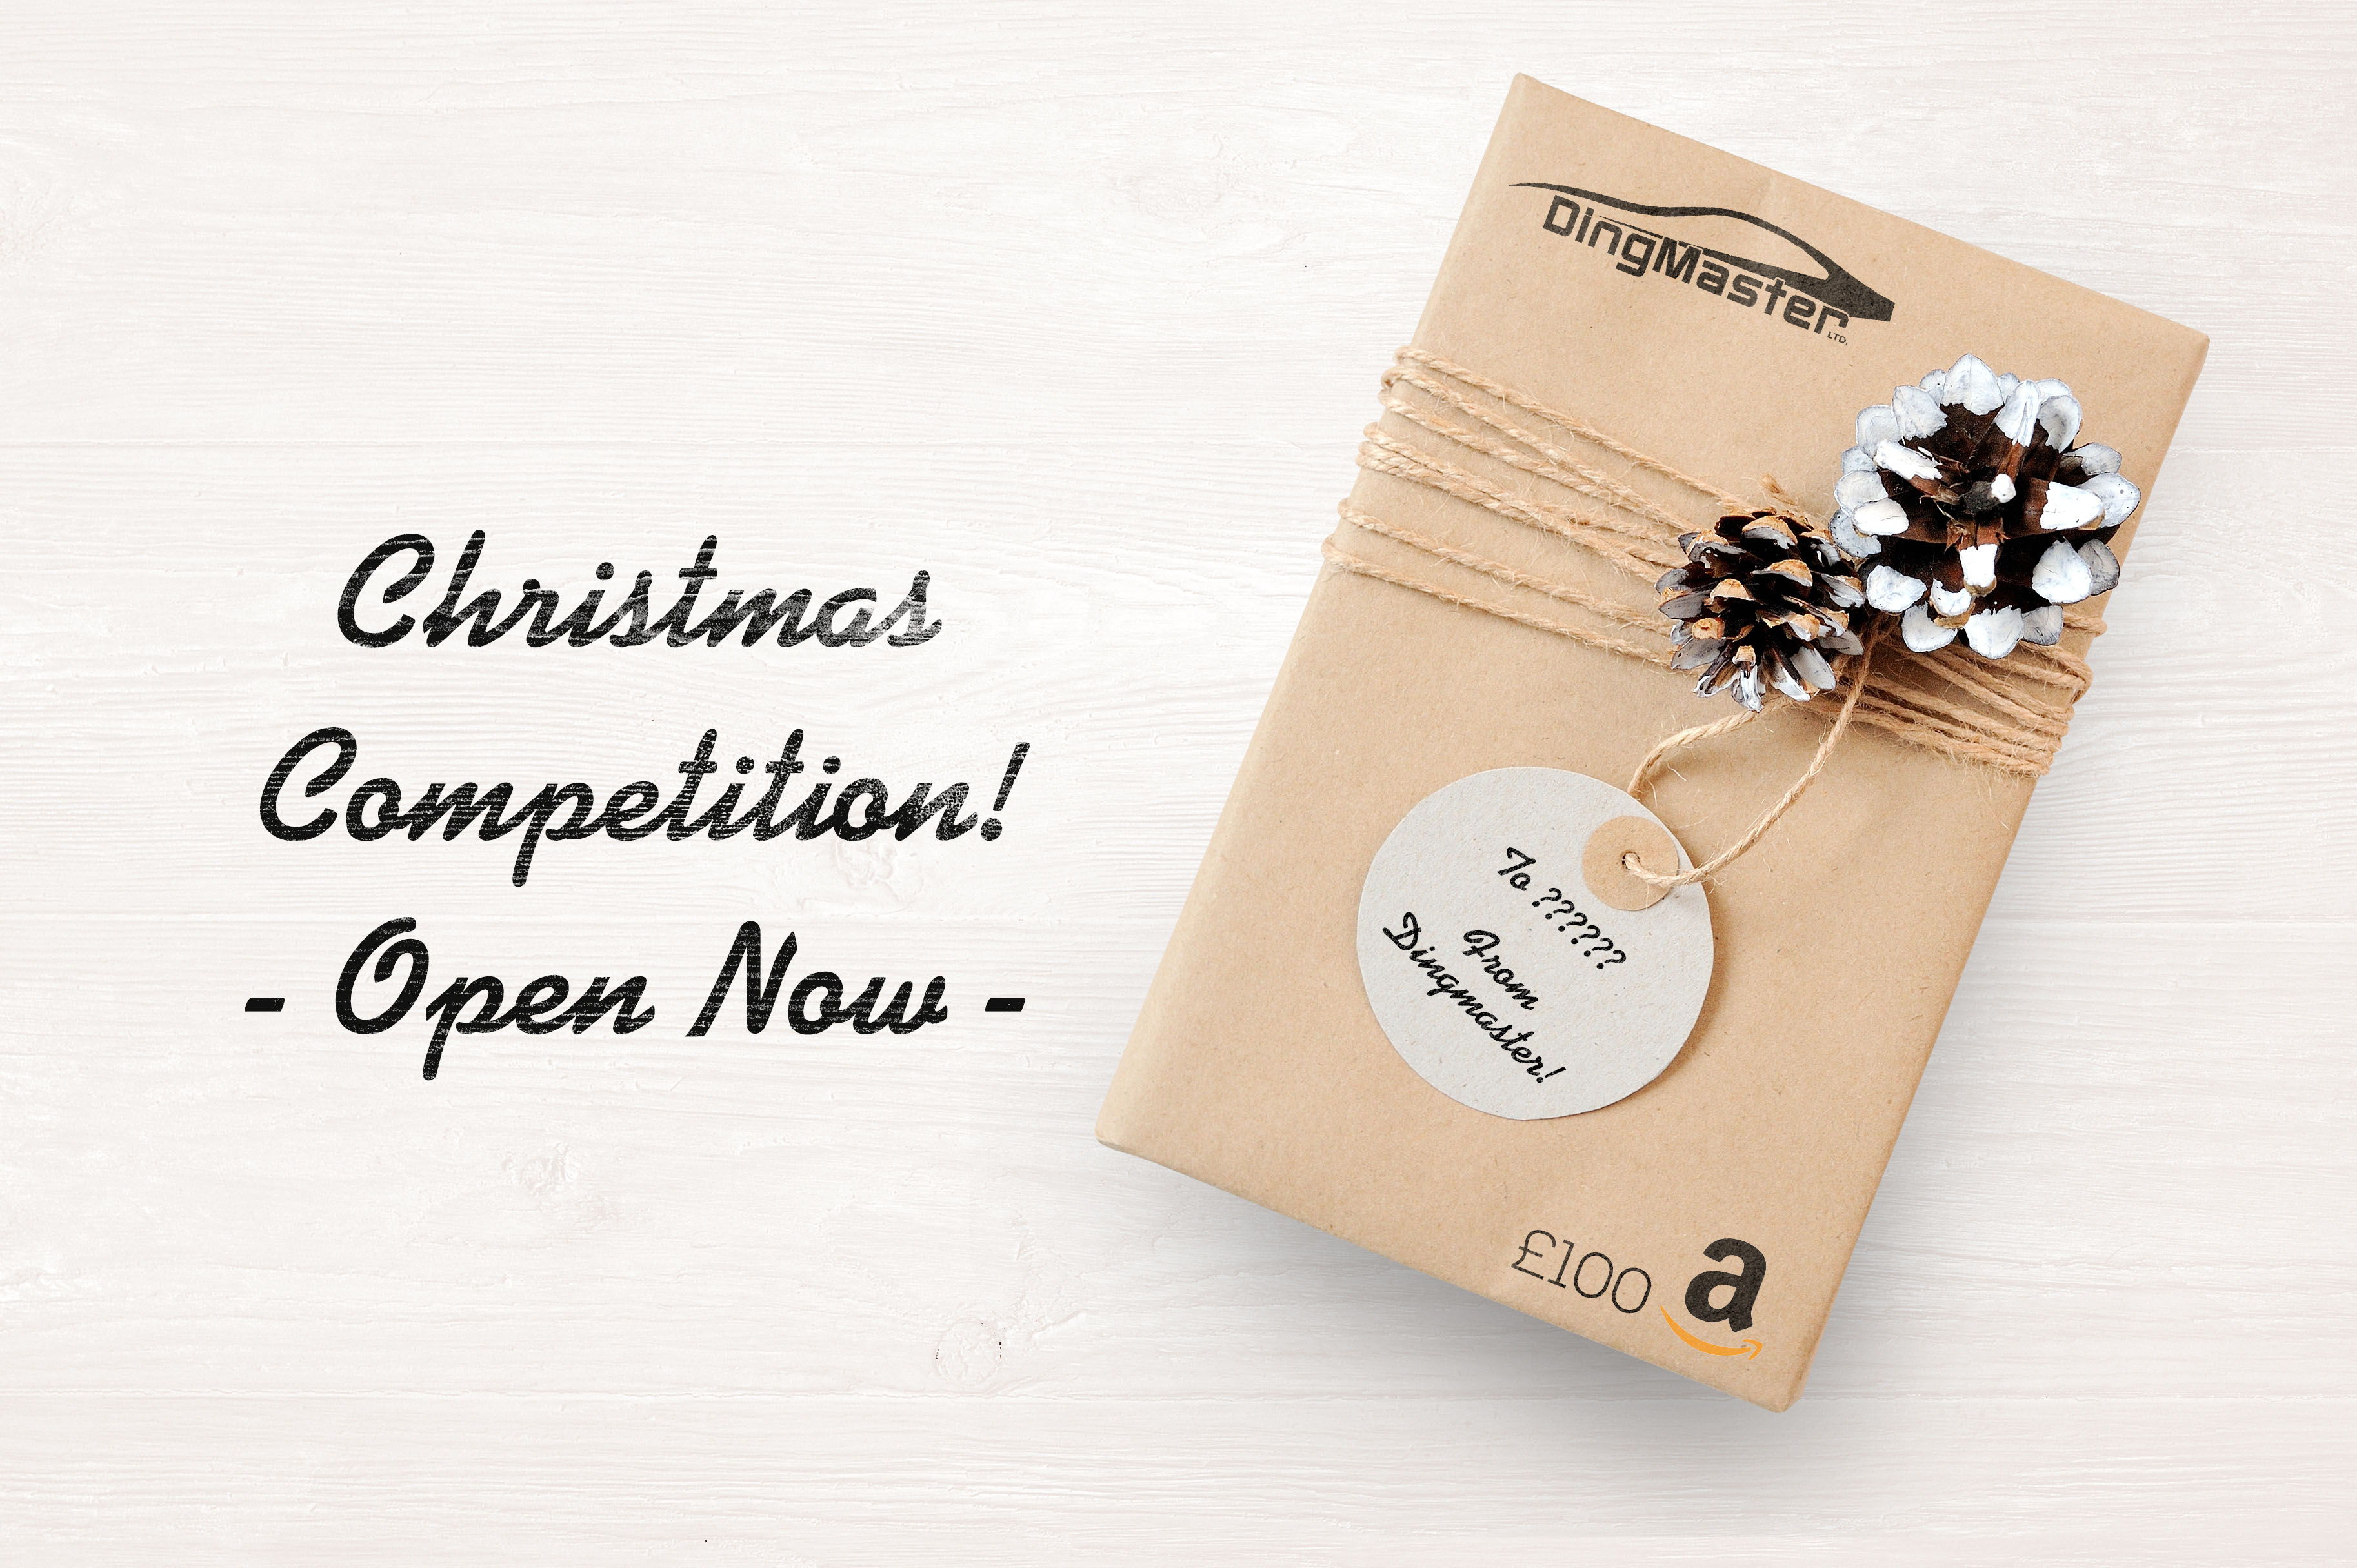 Dingmaster Christmas Competition 2018!